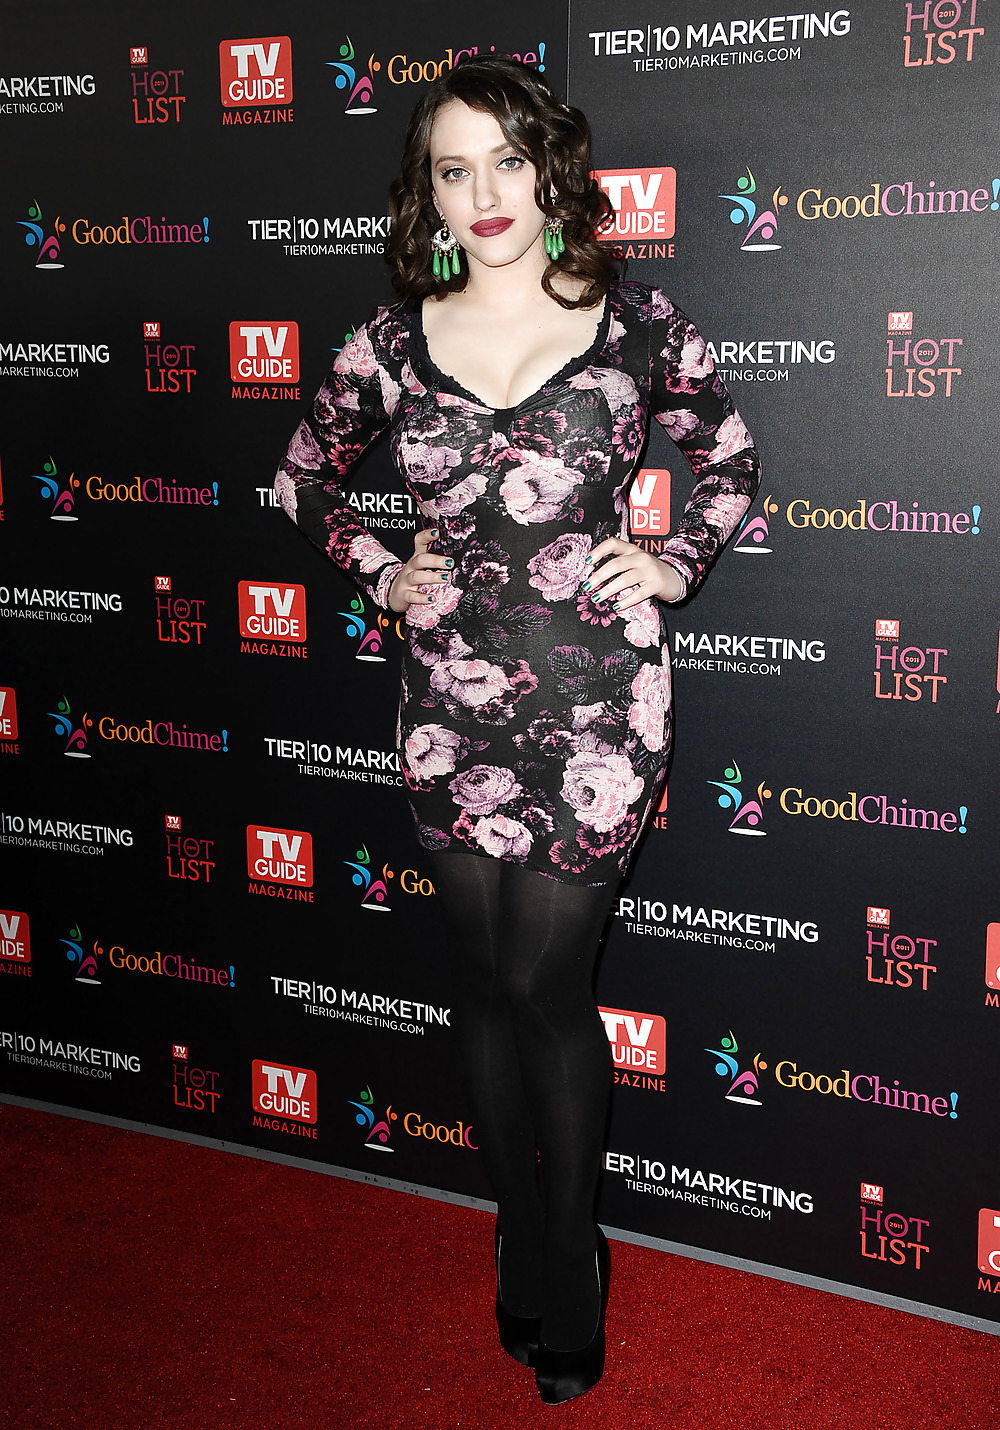 Kat Dennings - TV Guide Magazines Hot List party in LA #6758116